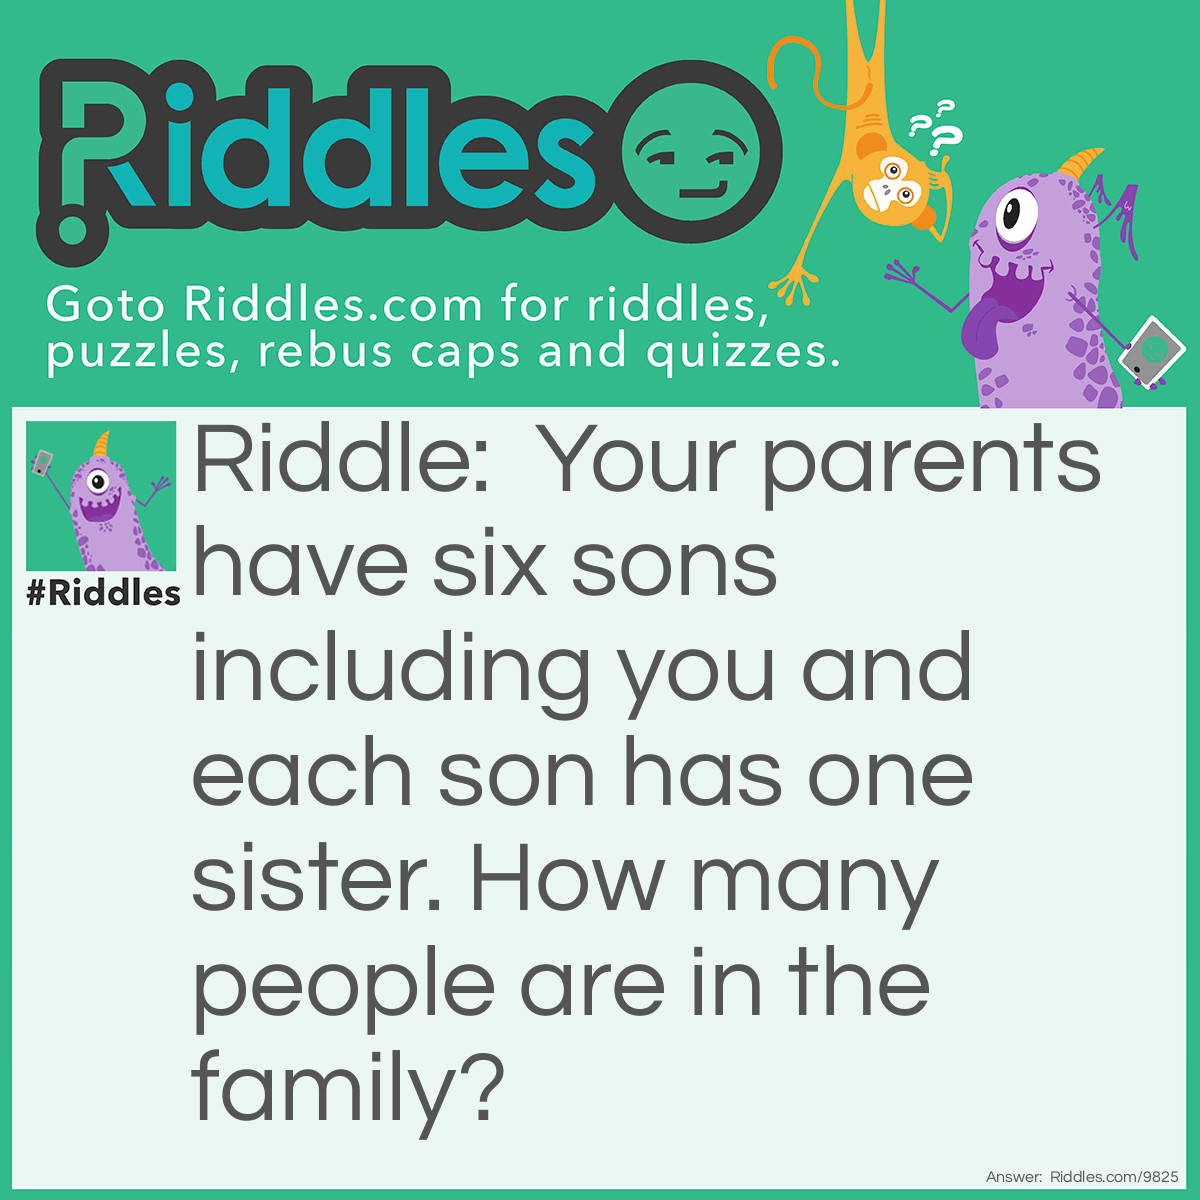 Riddle: Your parents have six sons including you and each son has one sister. How many people are in the family? Answer: 9. Two parents, six sons, and one daughter.